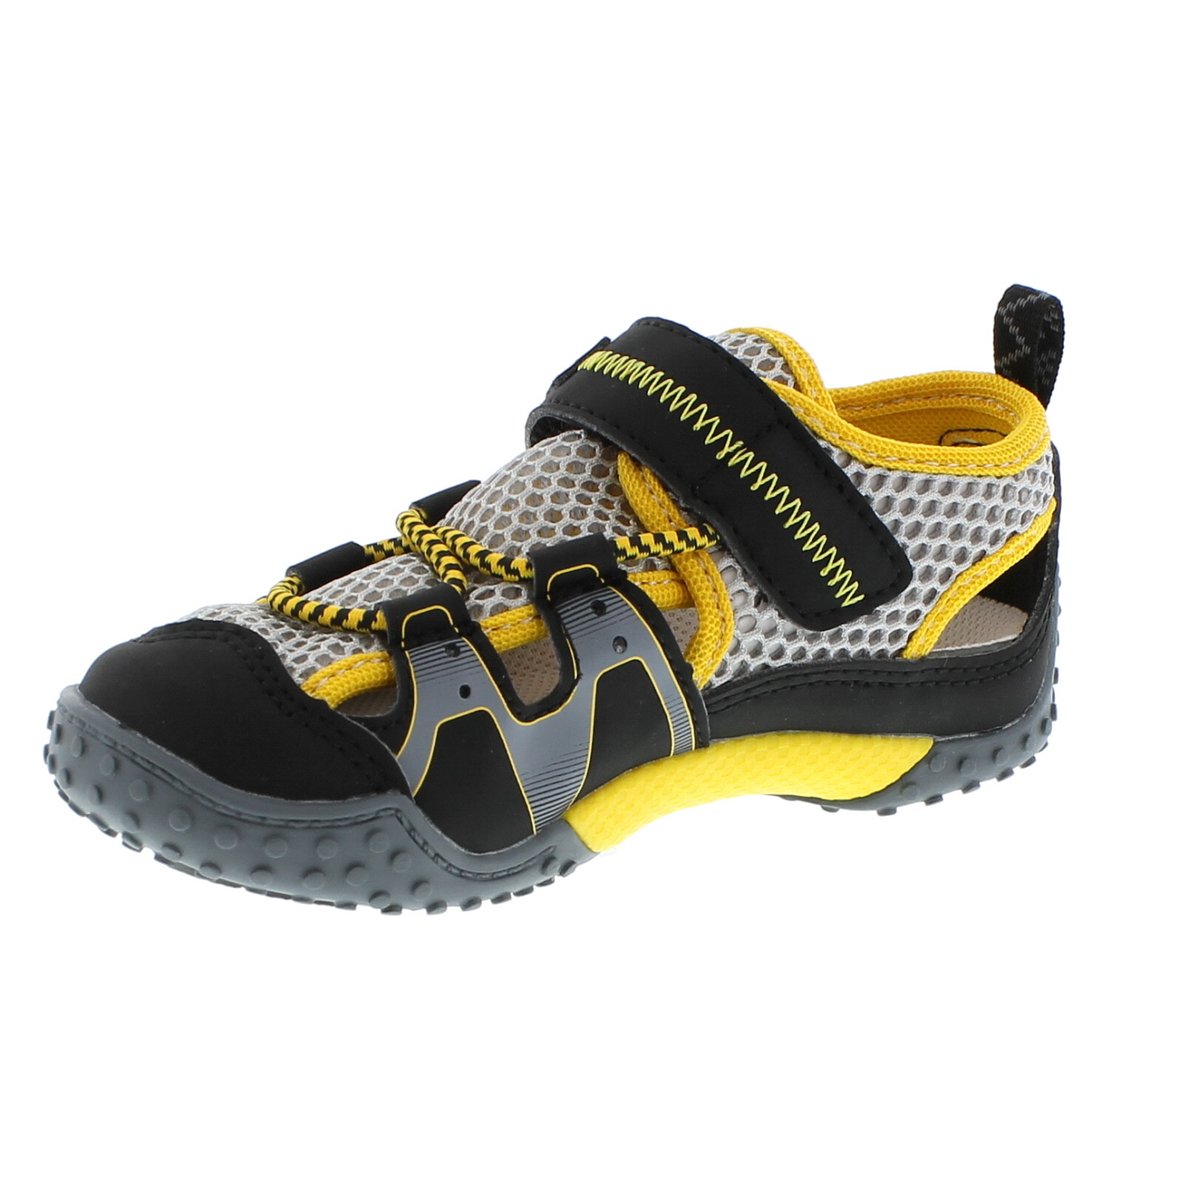 Child Tsukihoshi Ibiza2 Sneaker in Black/Yellow from the front view